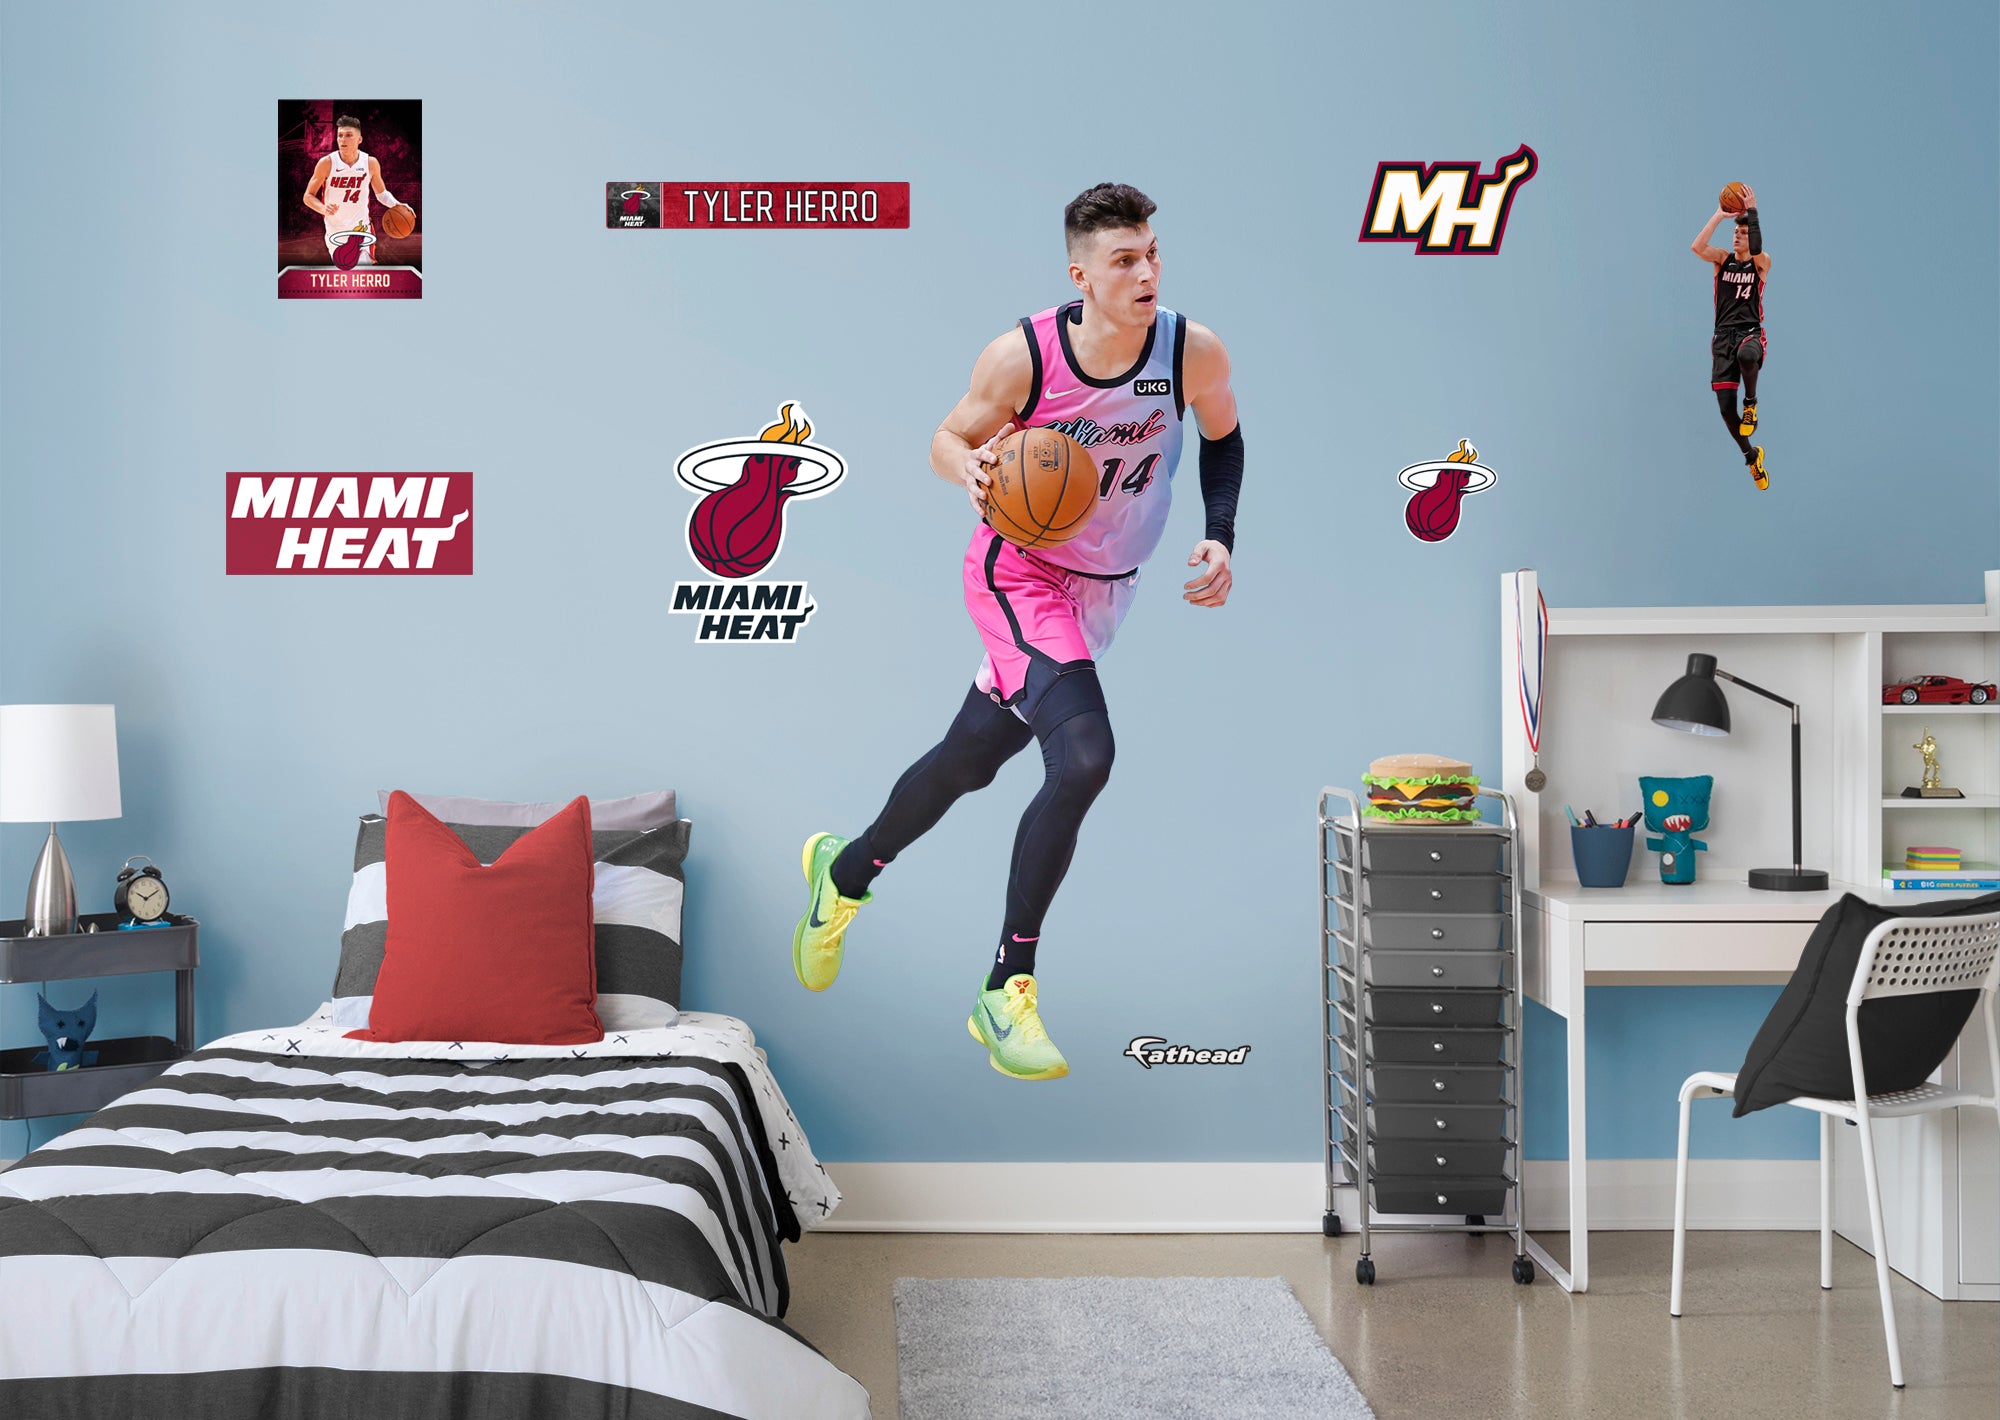 Tyler Herro 2021 Vice City for Miami Heat - Officially Licensed NBA Removable Wall Decal Life-Size Athlete + 8 Decals (31"W x77"